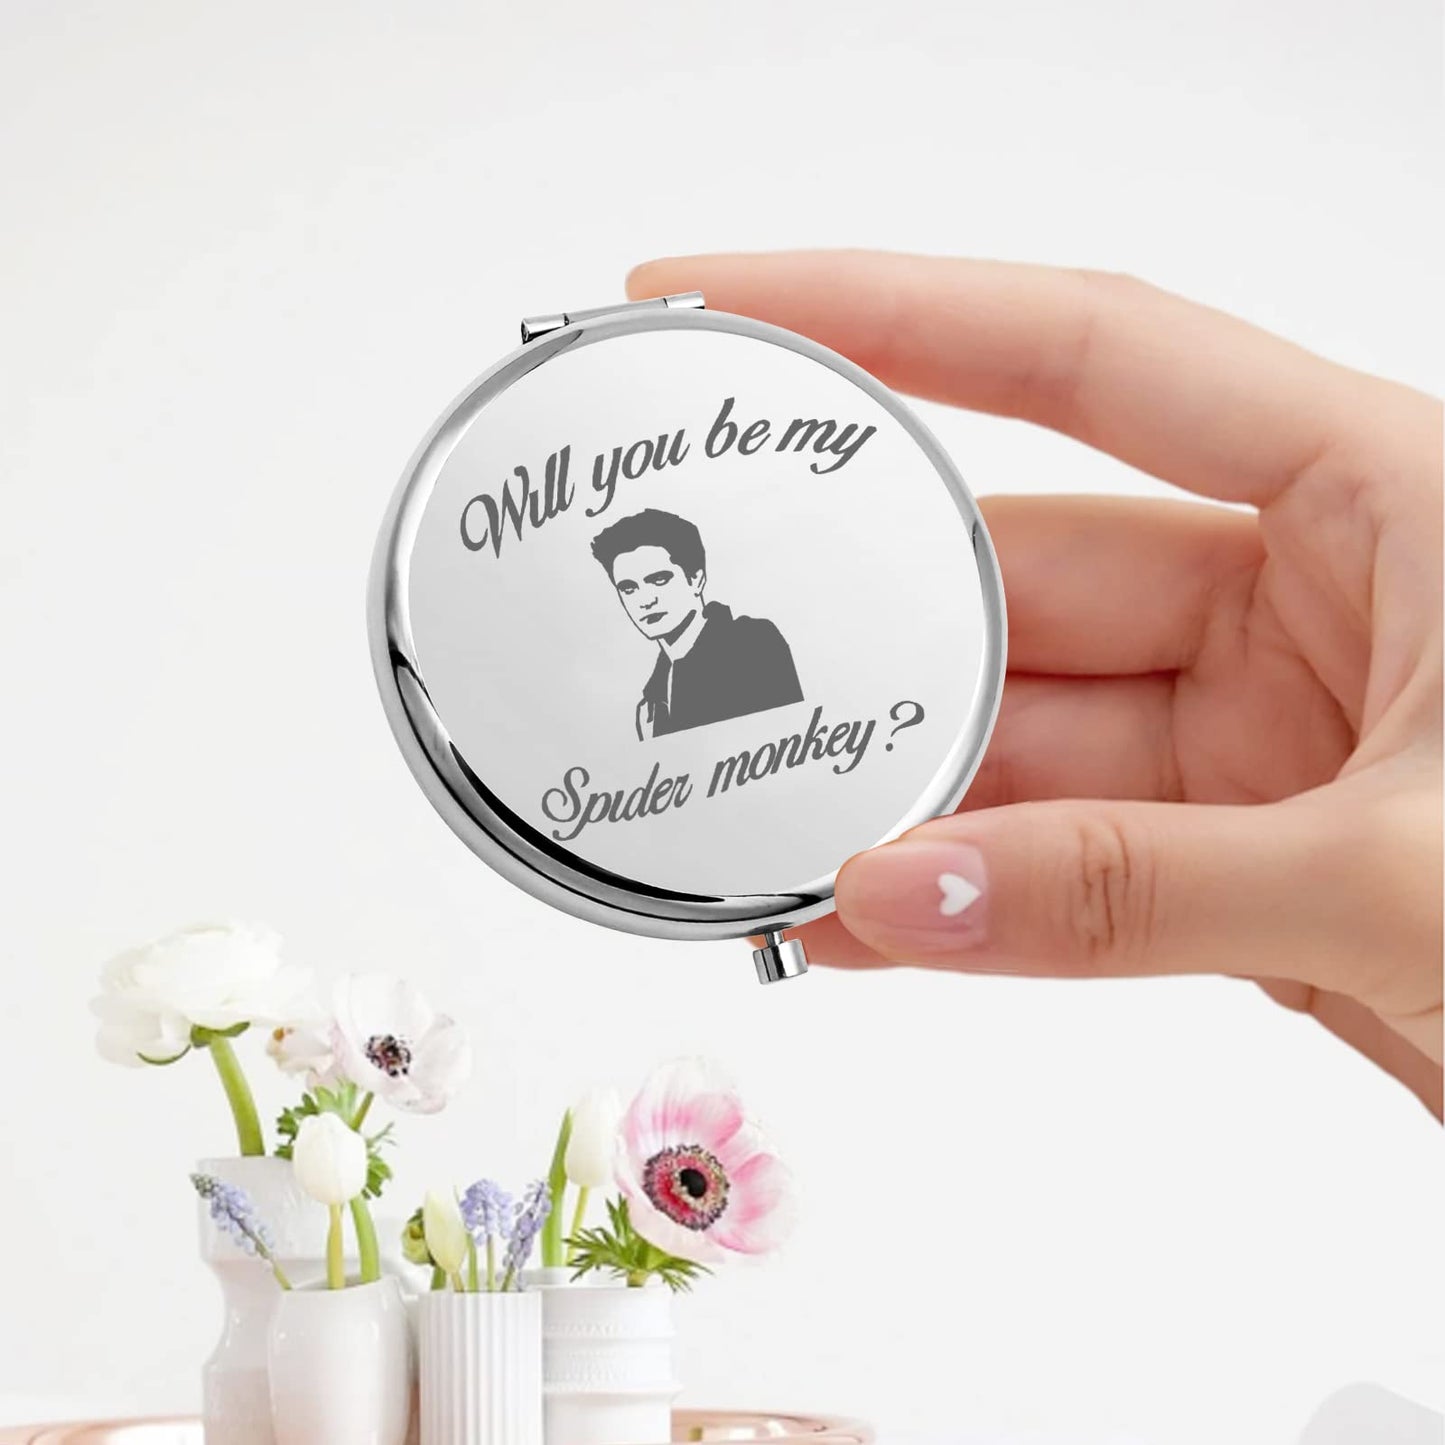 KEYCHIN Twilight Movie Pocket Mirror Twilight Edward and Bella Fans Gifts Will You Be My Spider Monkey Compact Mirror for Women Girls Teenager (Spider monkey-S)